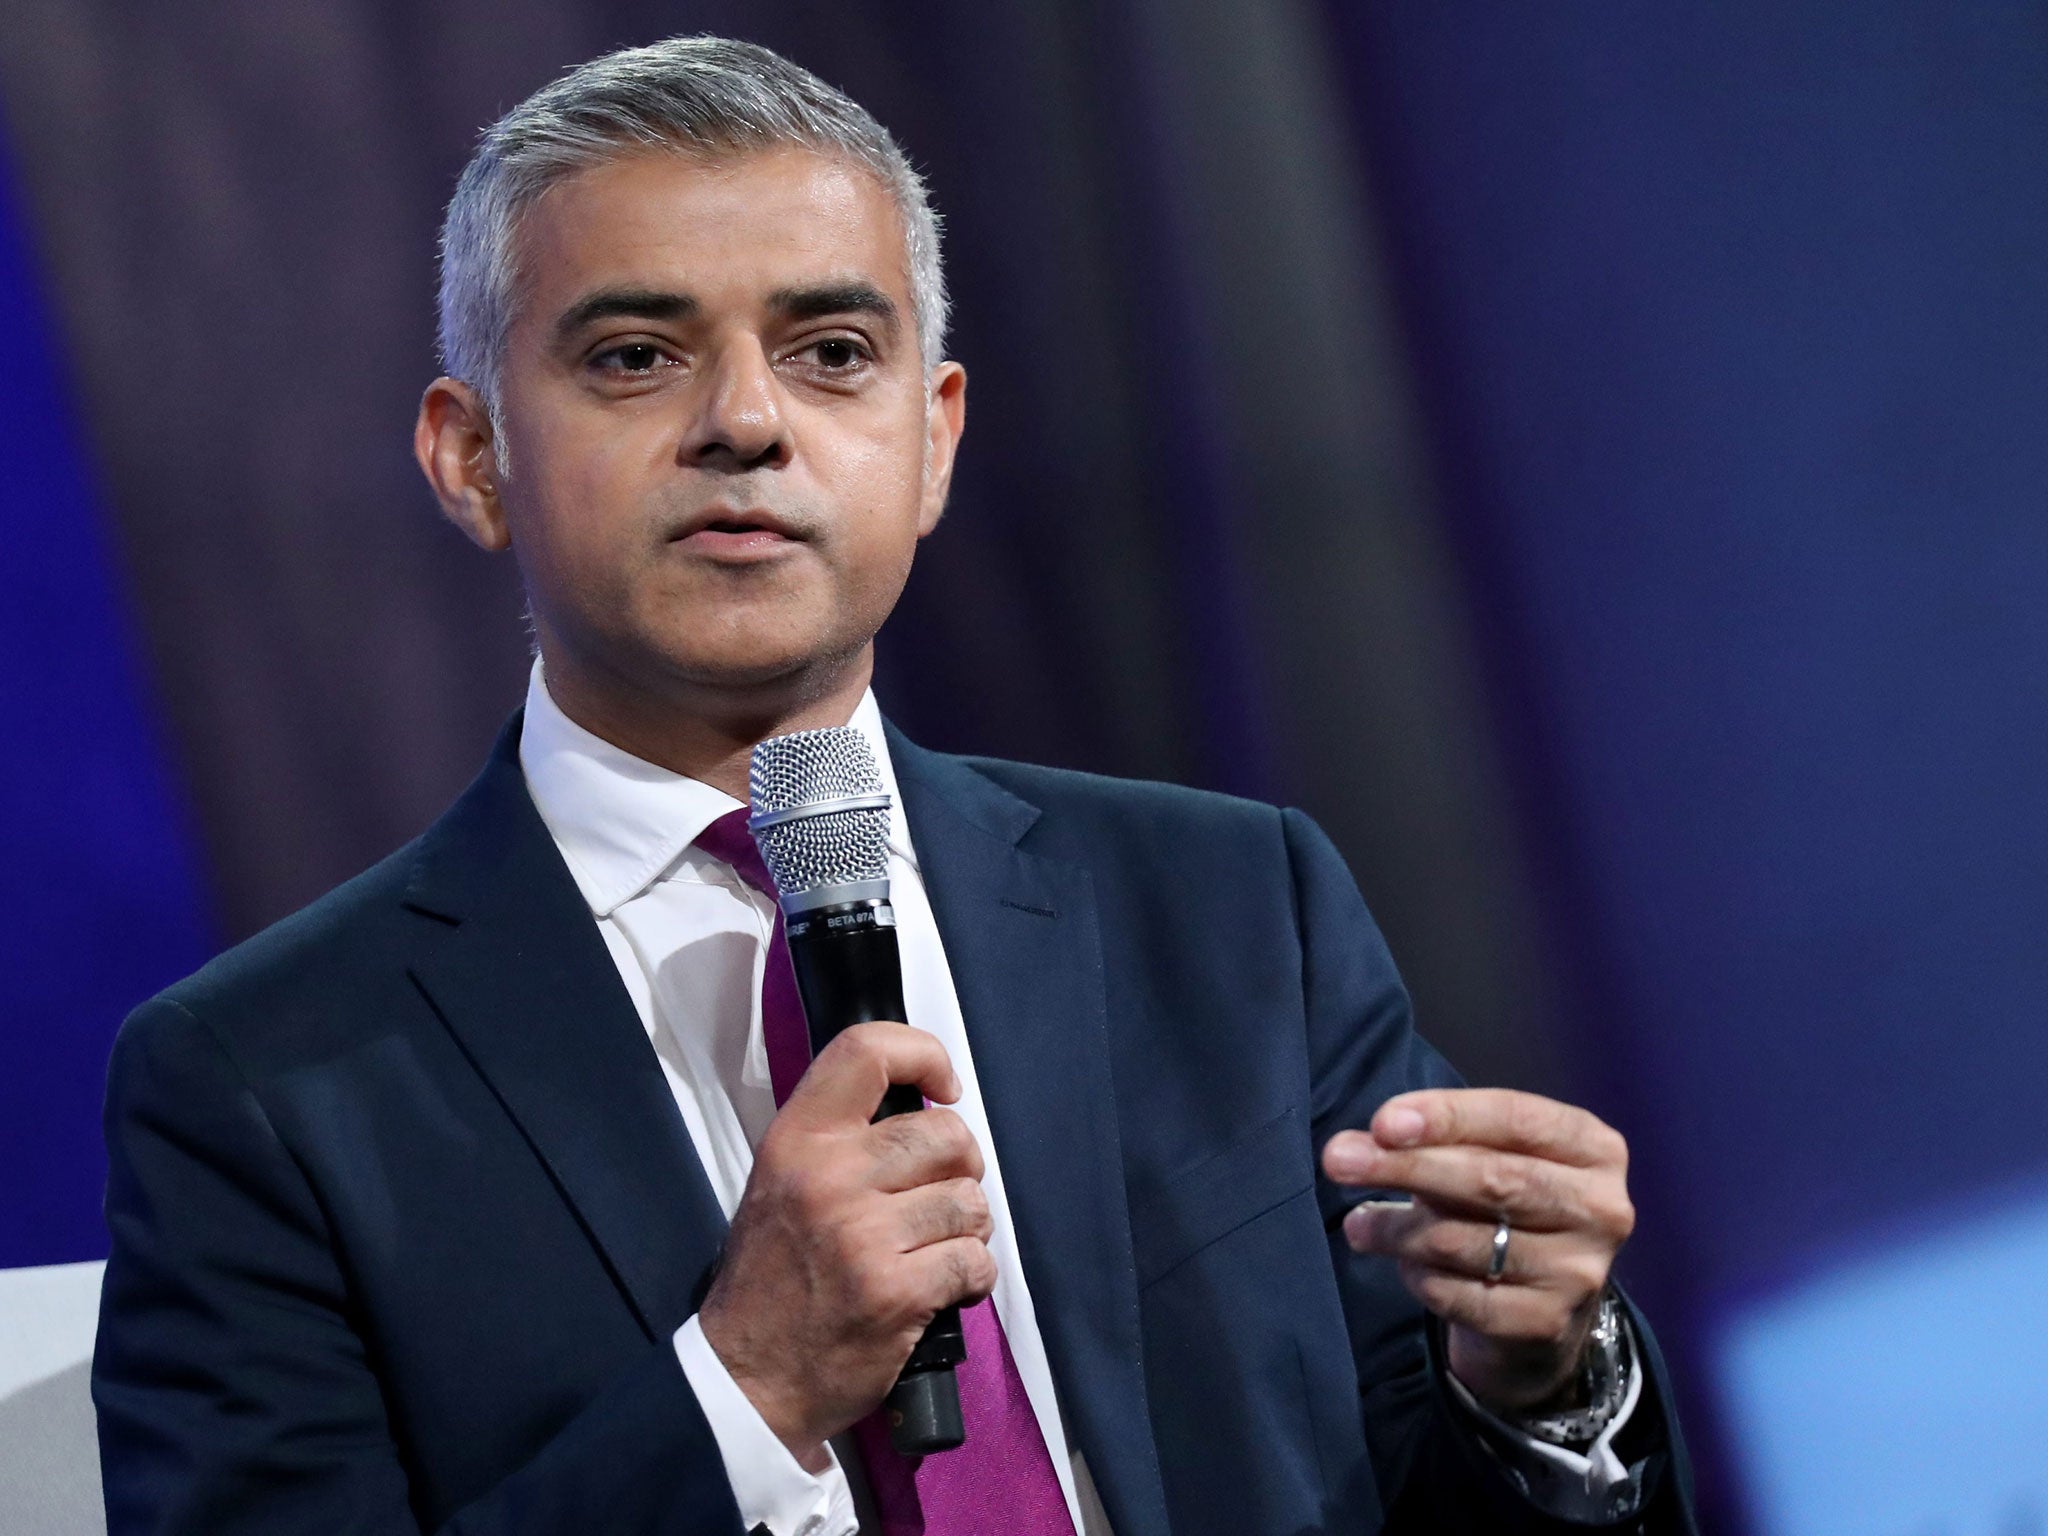 Sadiq Khan will address the Labour conference on Tuesday